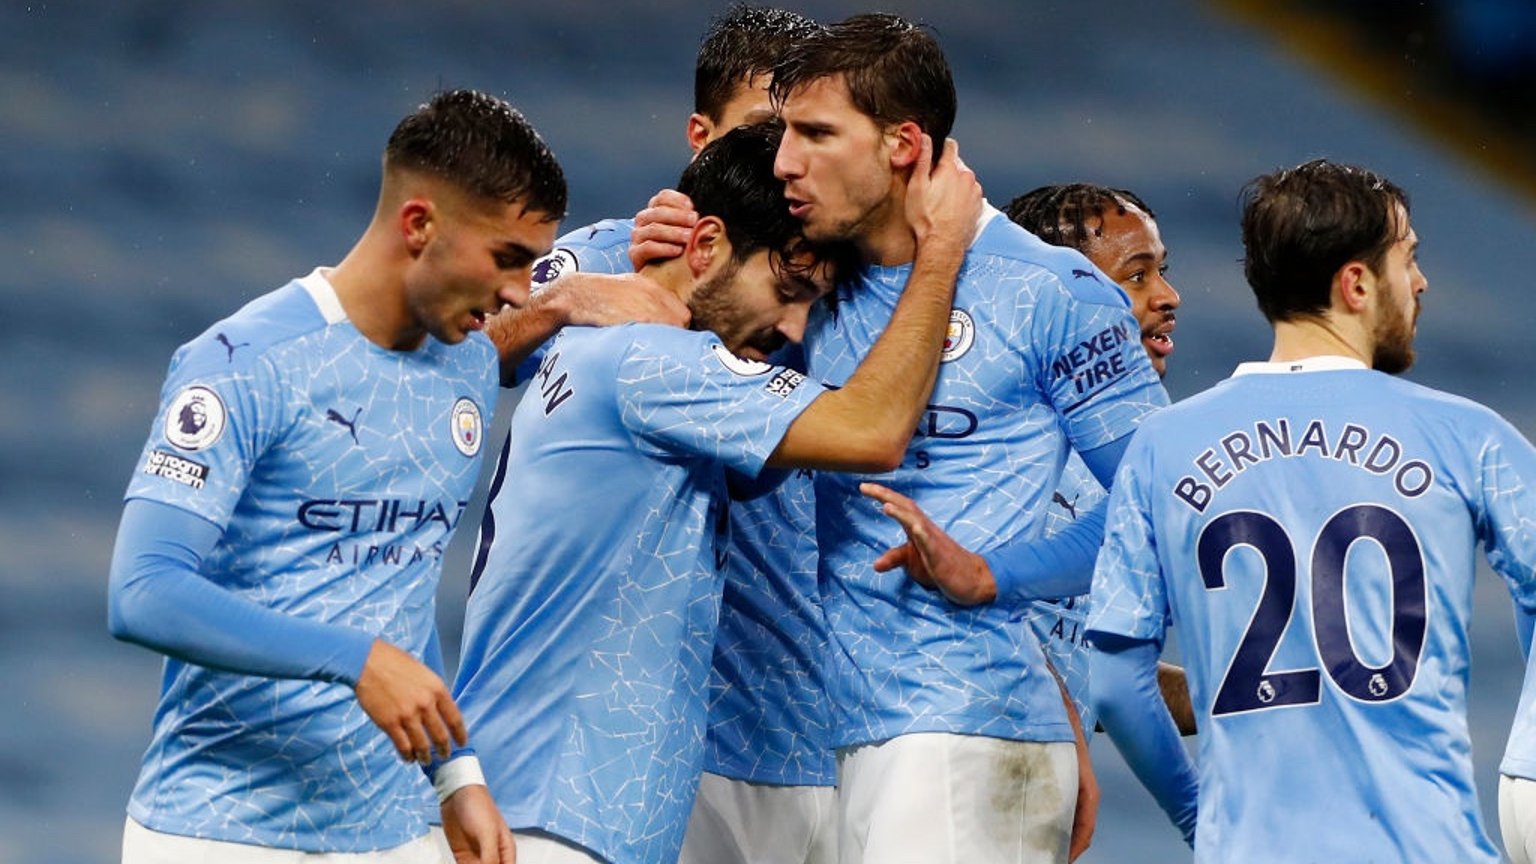 FESTIVE SPIRIT: The players share the love after Gundogan's composed finish.